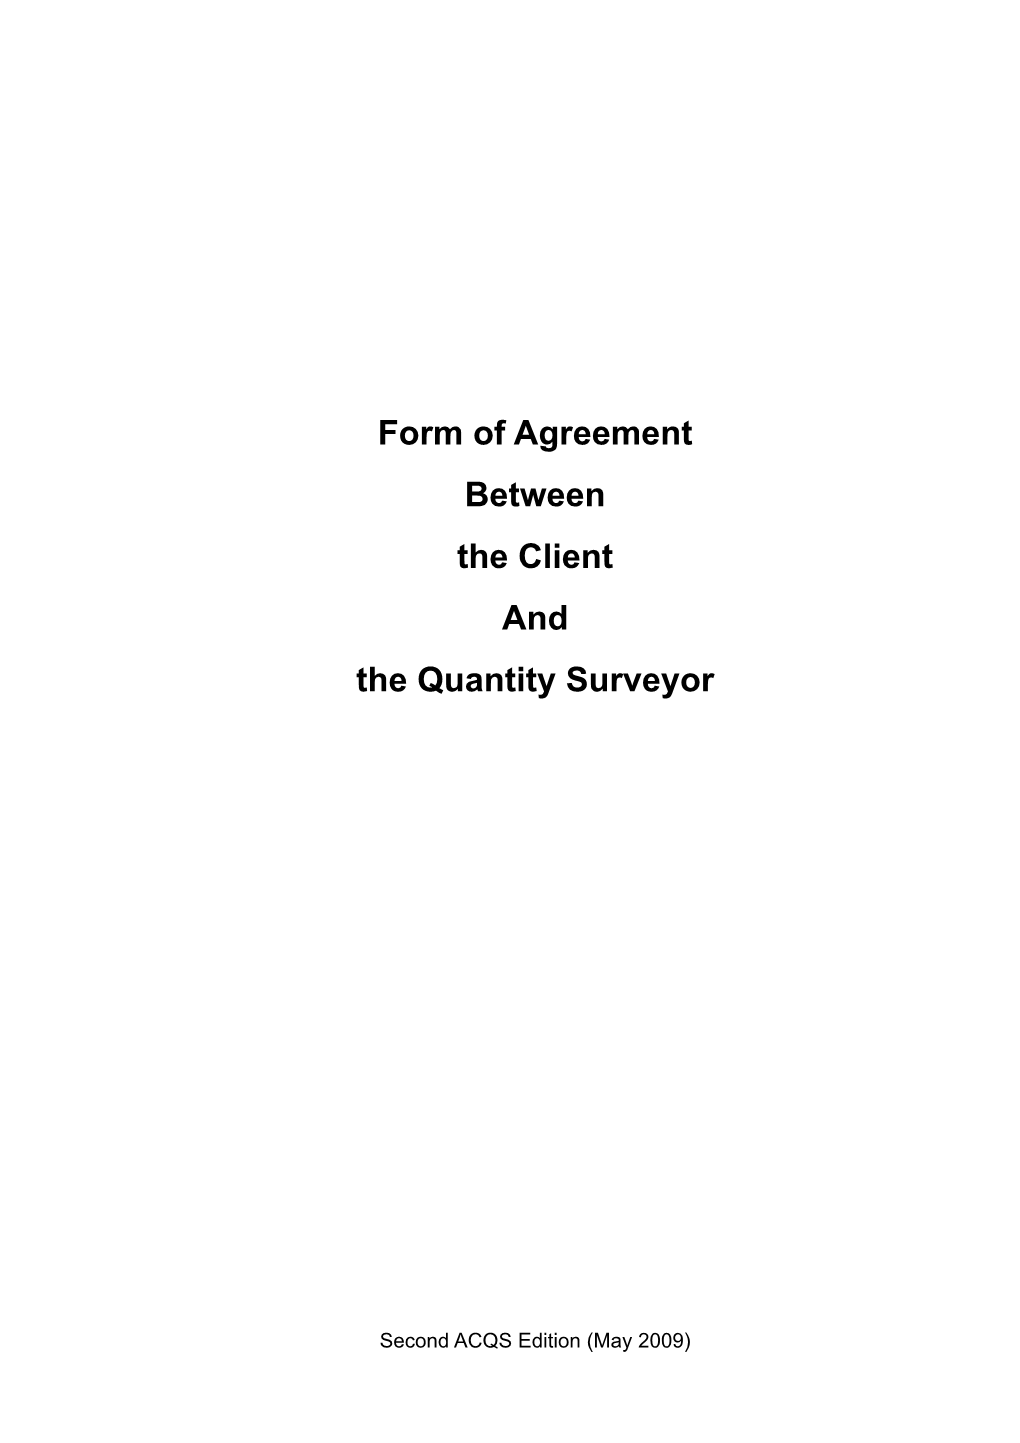 Form of Agreement Between the Client and the Quantity Surveyor